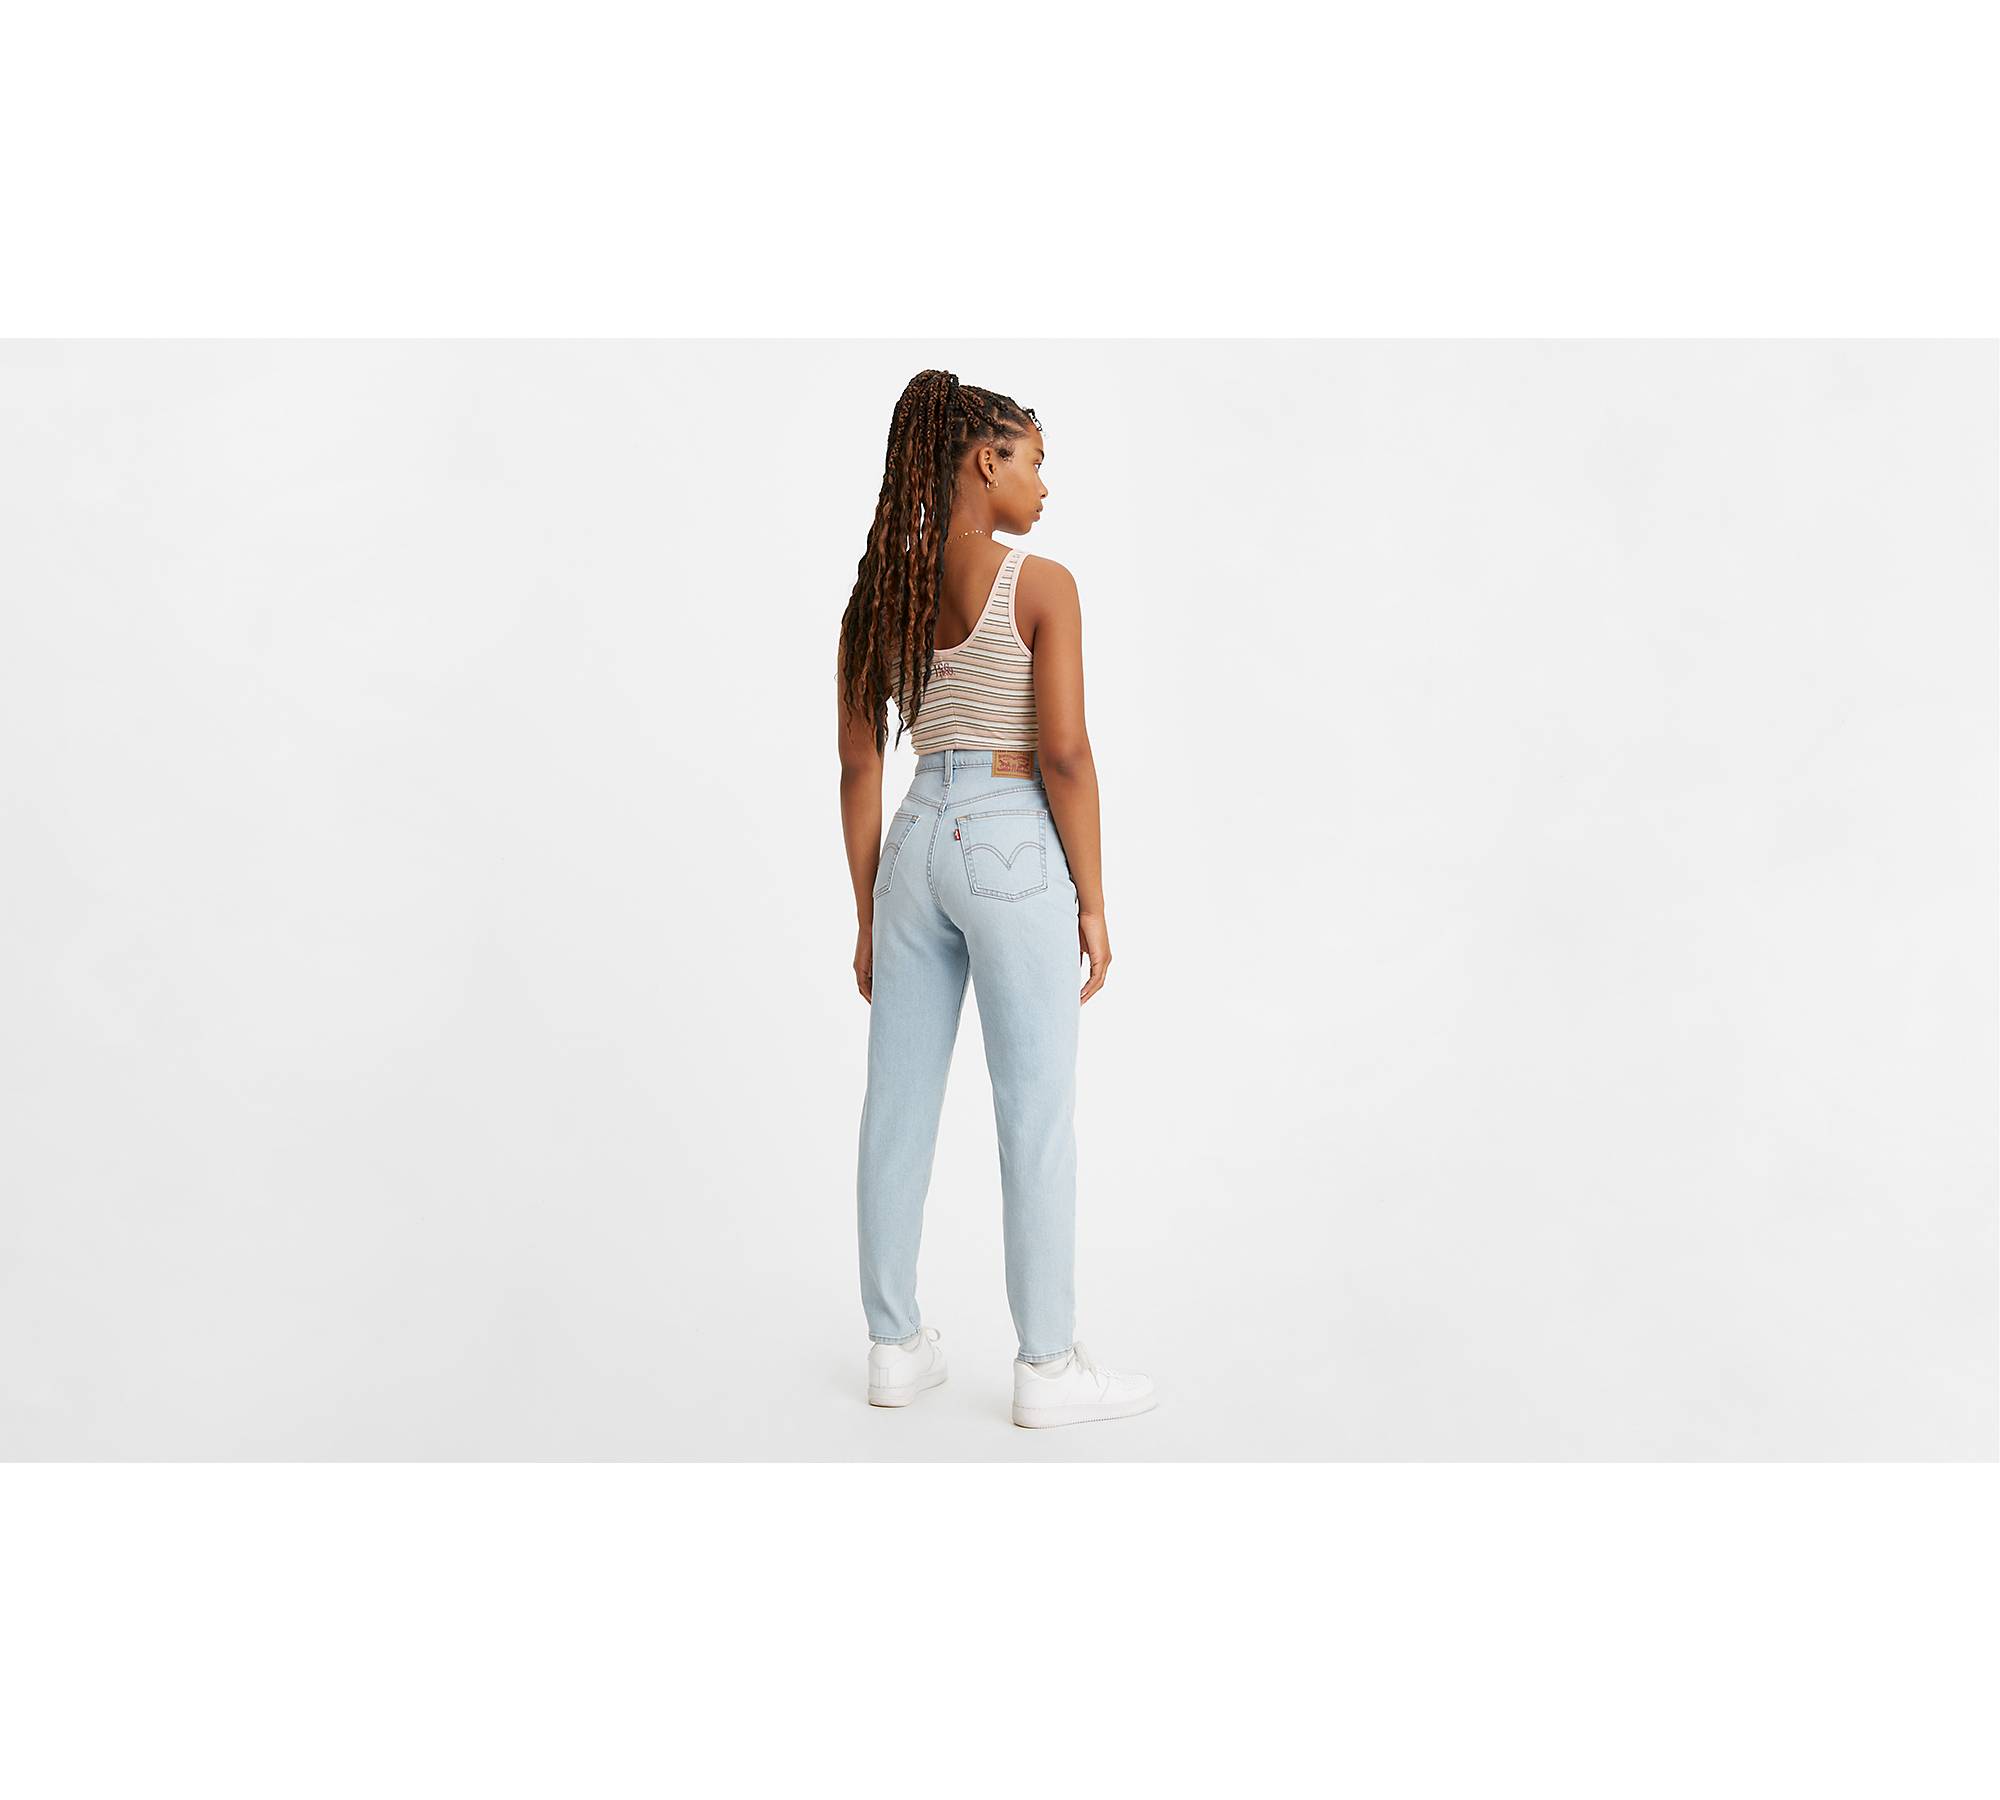 Tapered Jeans For Women